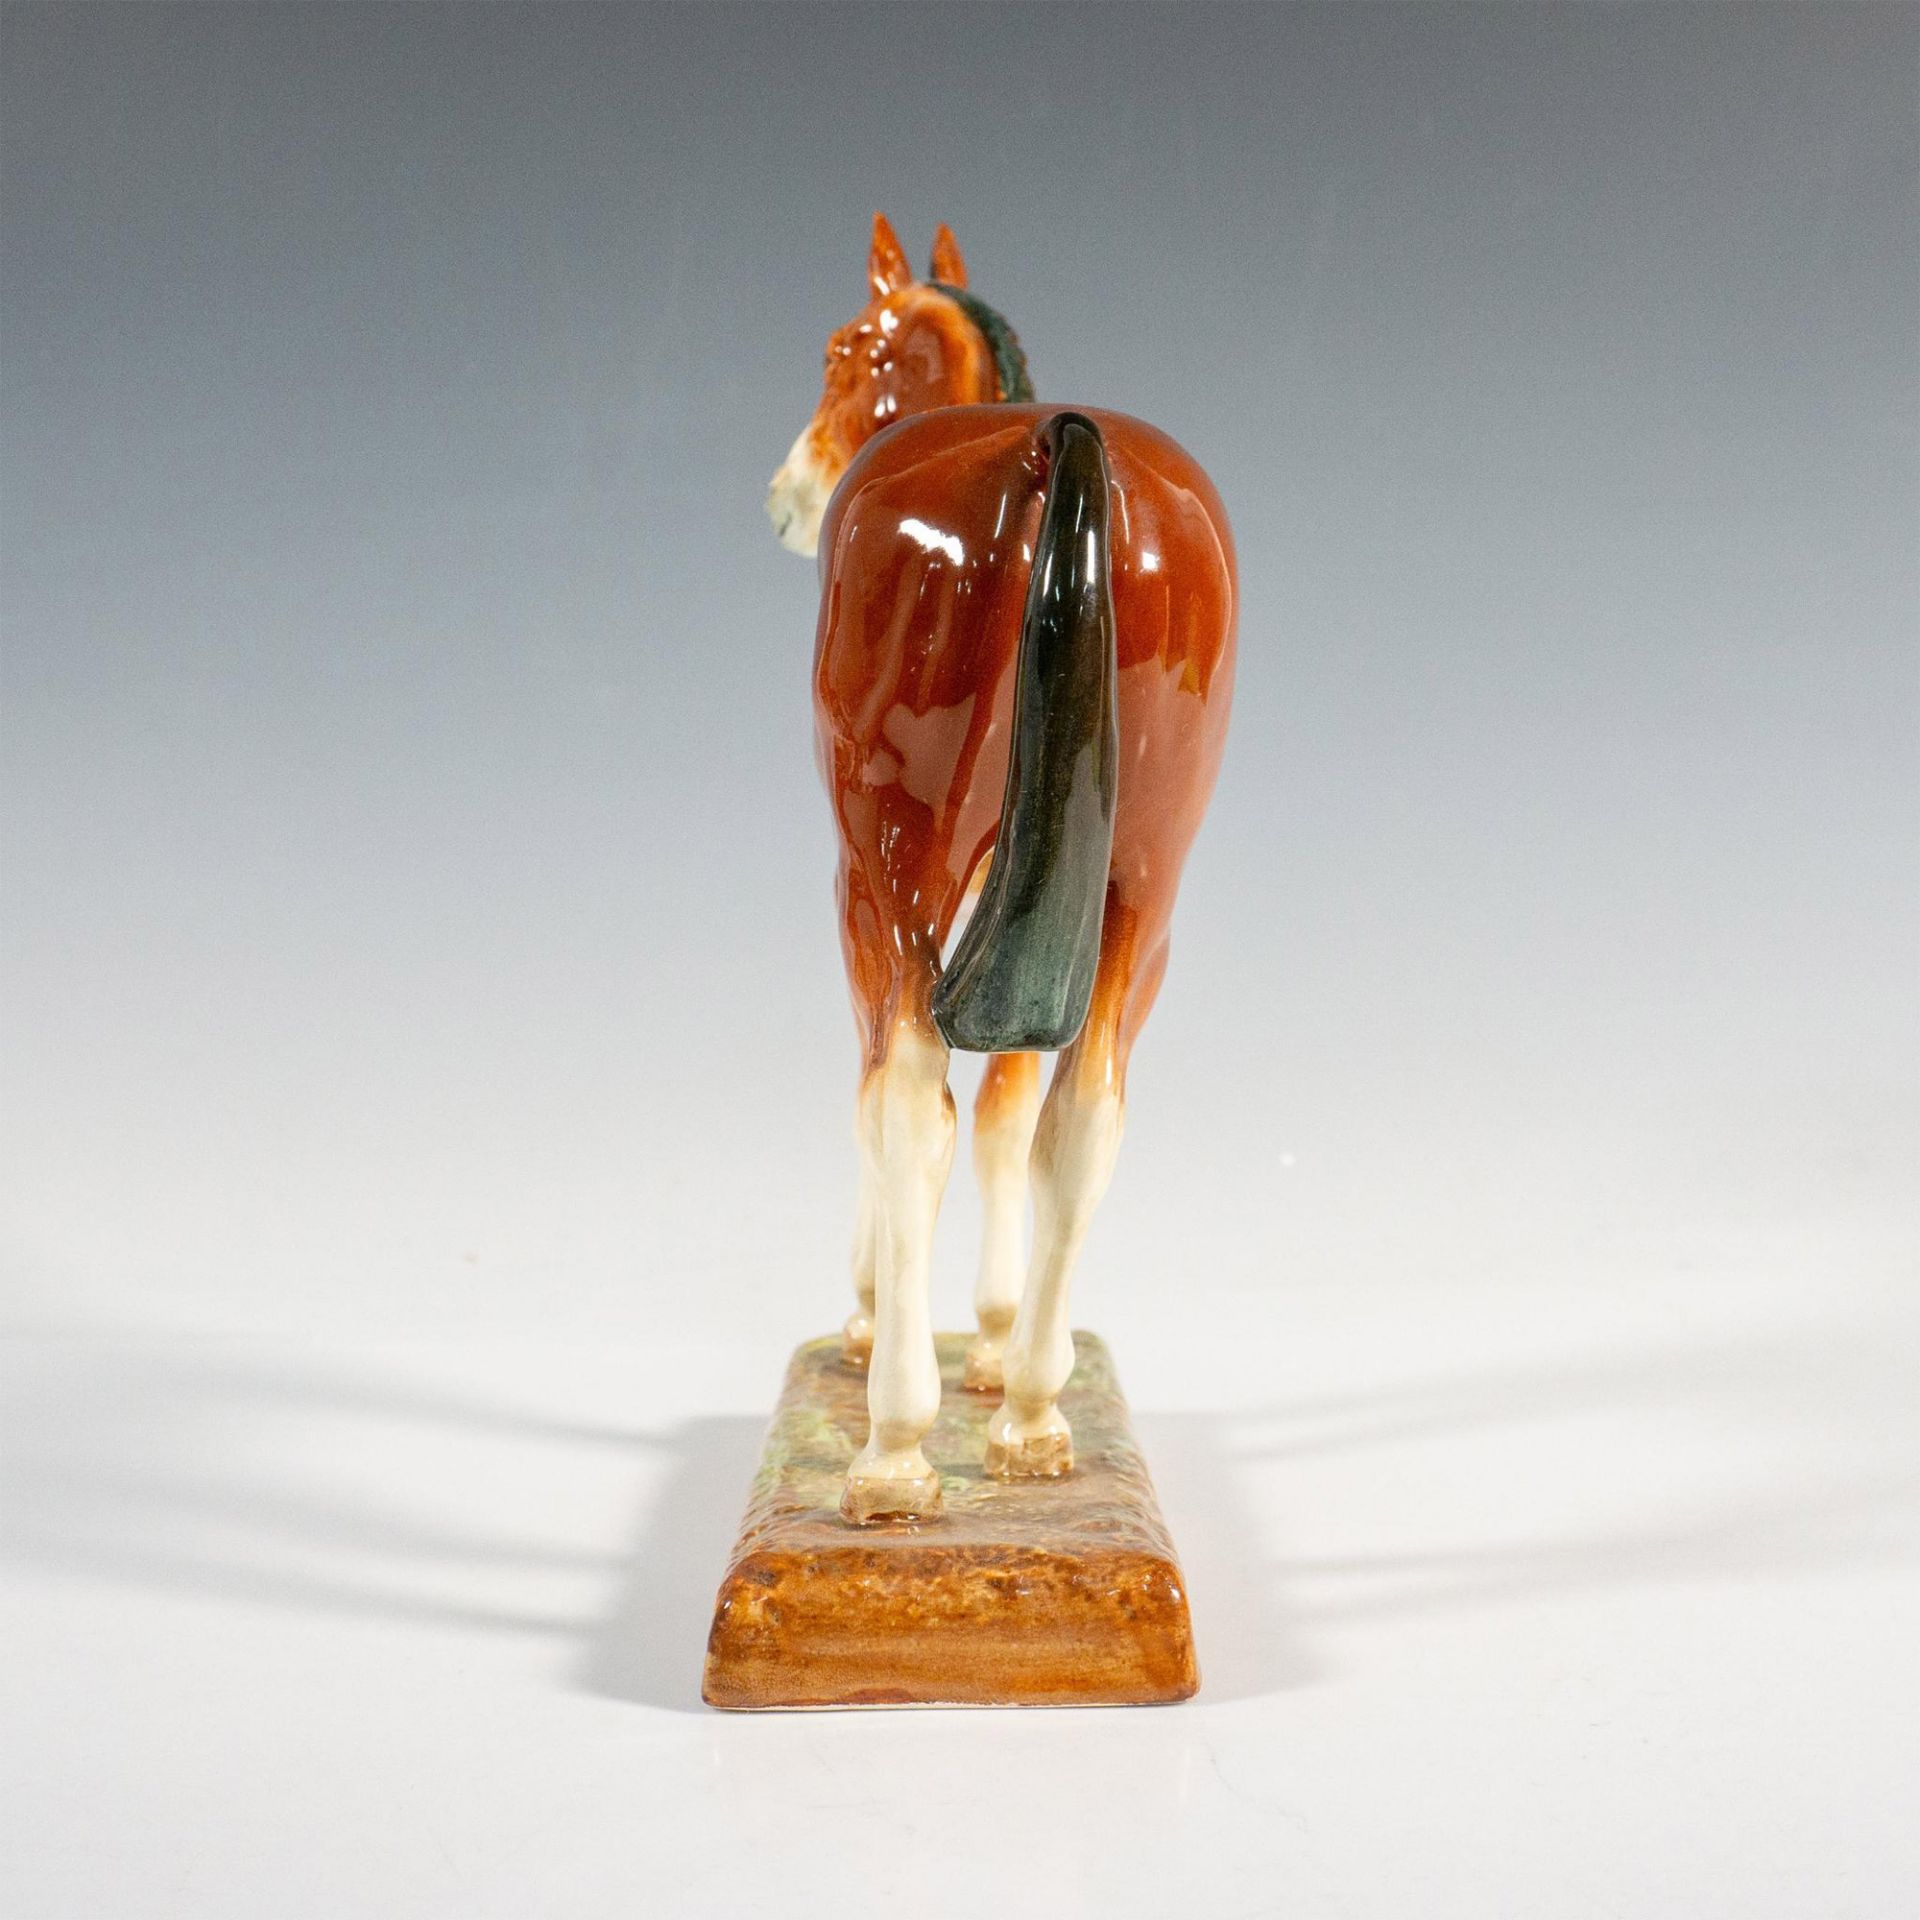 Merely a Minor - HN2537 - Royal Doulton Figurine - Image 4 of 5